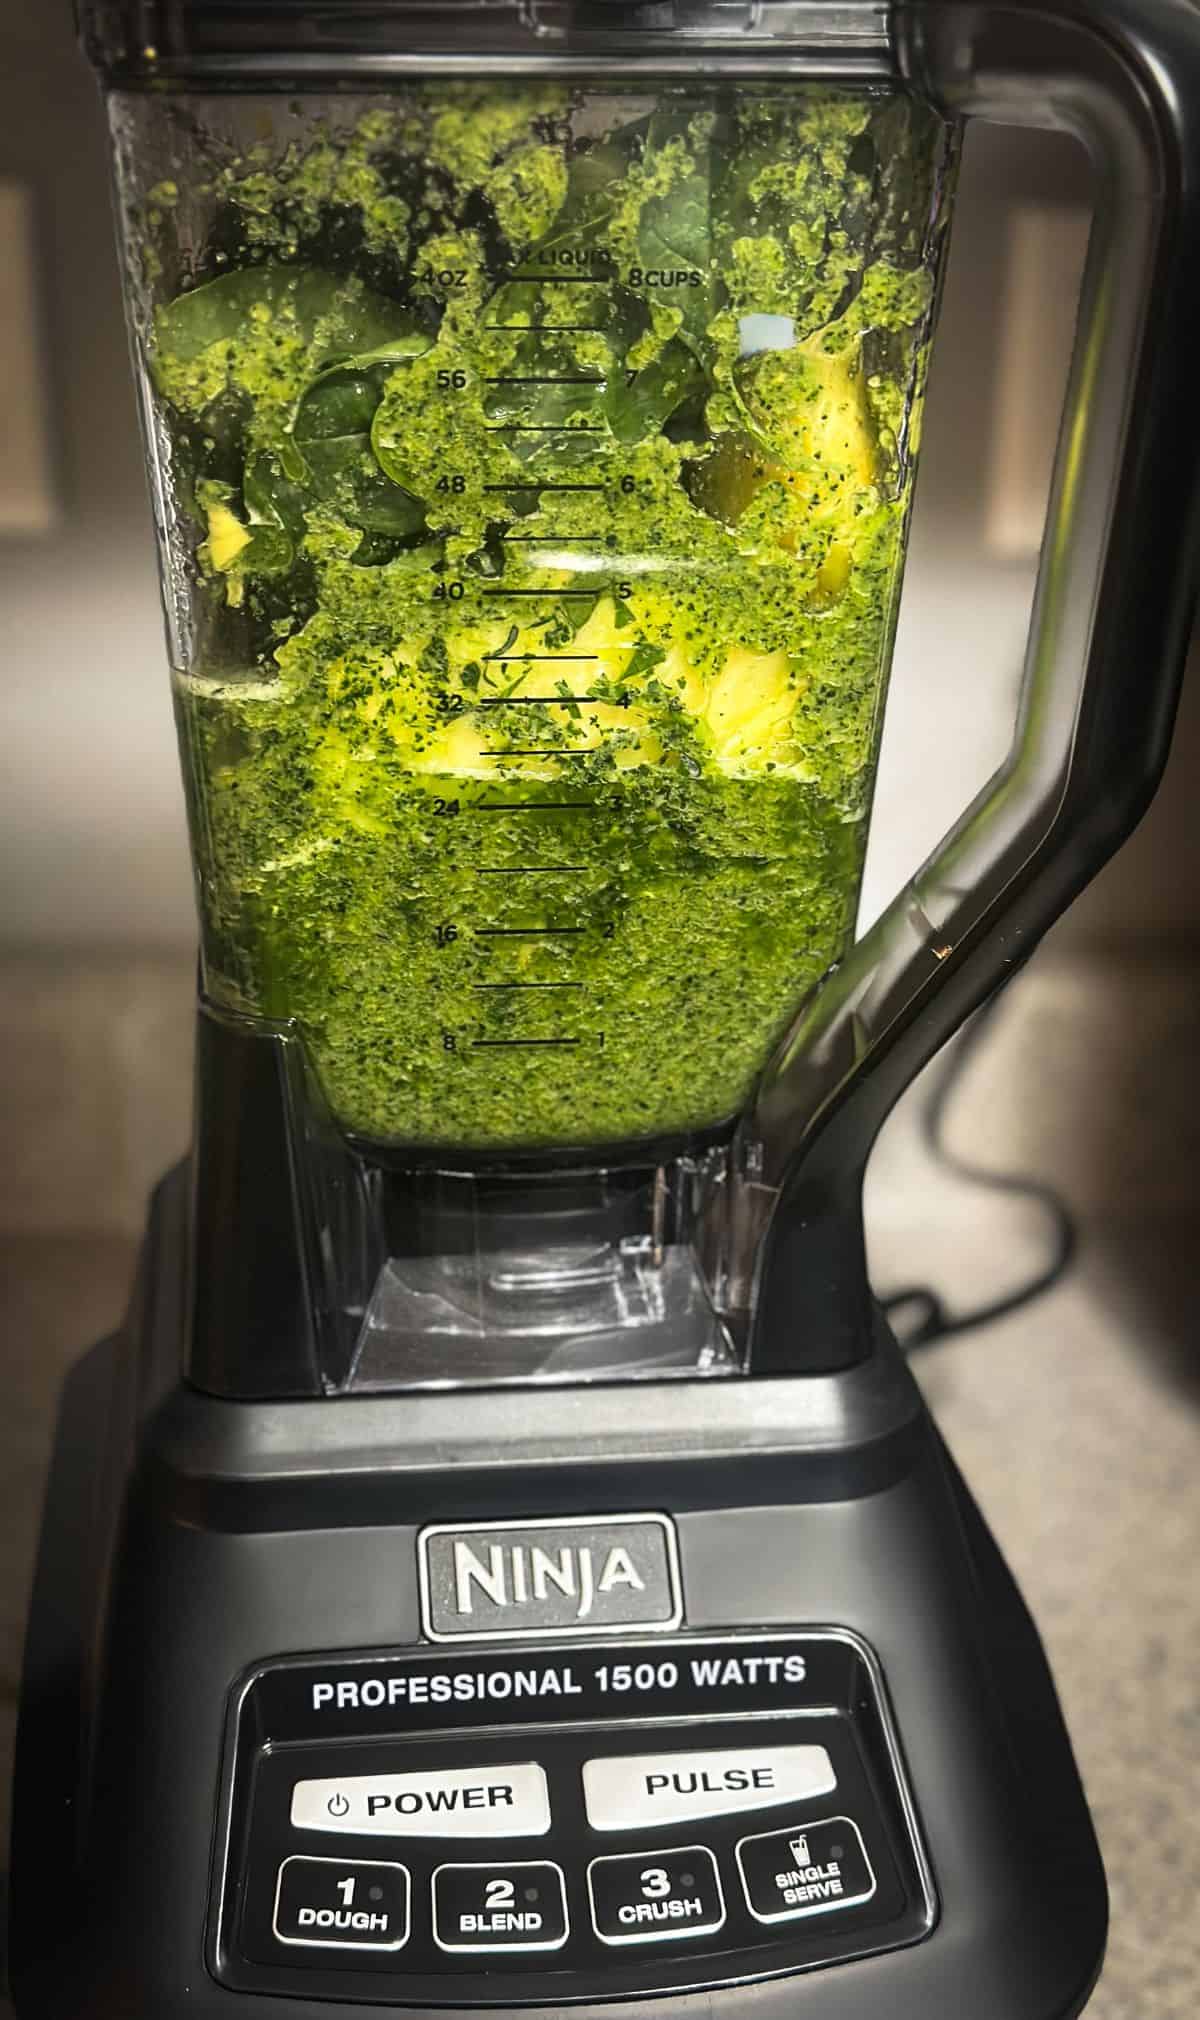 A black ninja blender filled with partially blended ingredients like spinach, kale, pineapple, and mango.